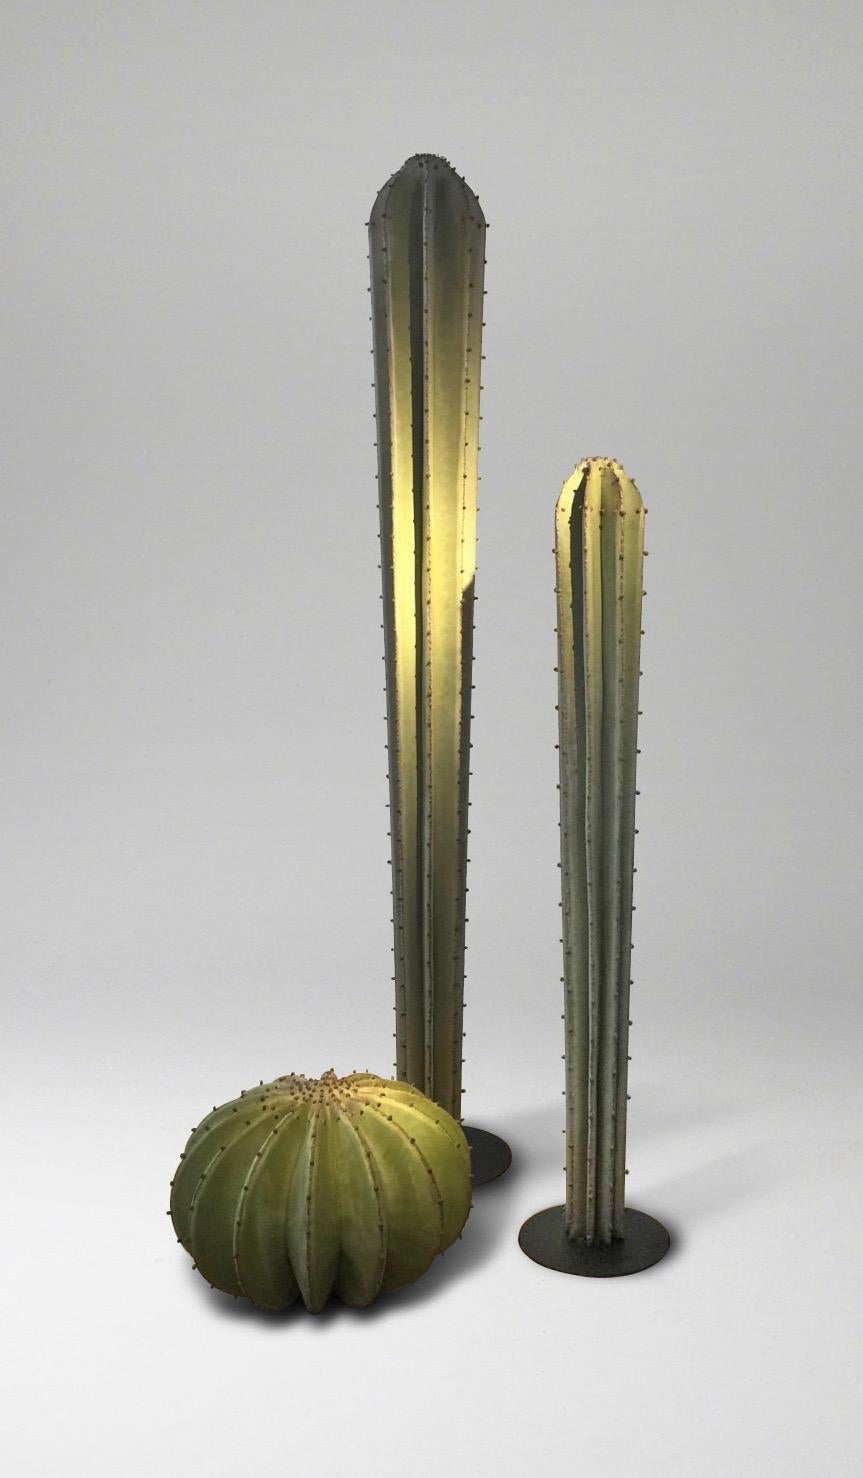 A group of three handwrought metal 'cacti', patinated in matte shaded green, for interior space or outdoor terrace or garden. Each is an independent sculpture so can be moved and arranged as desired.
Measures: Taller cactus height 200, diameter 25